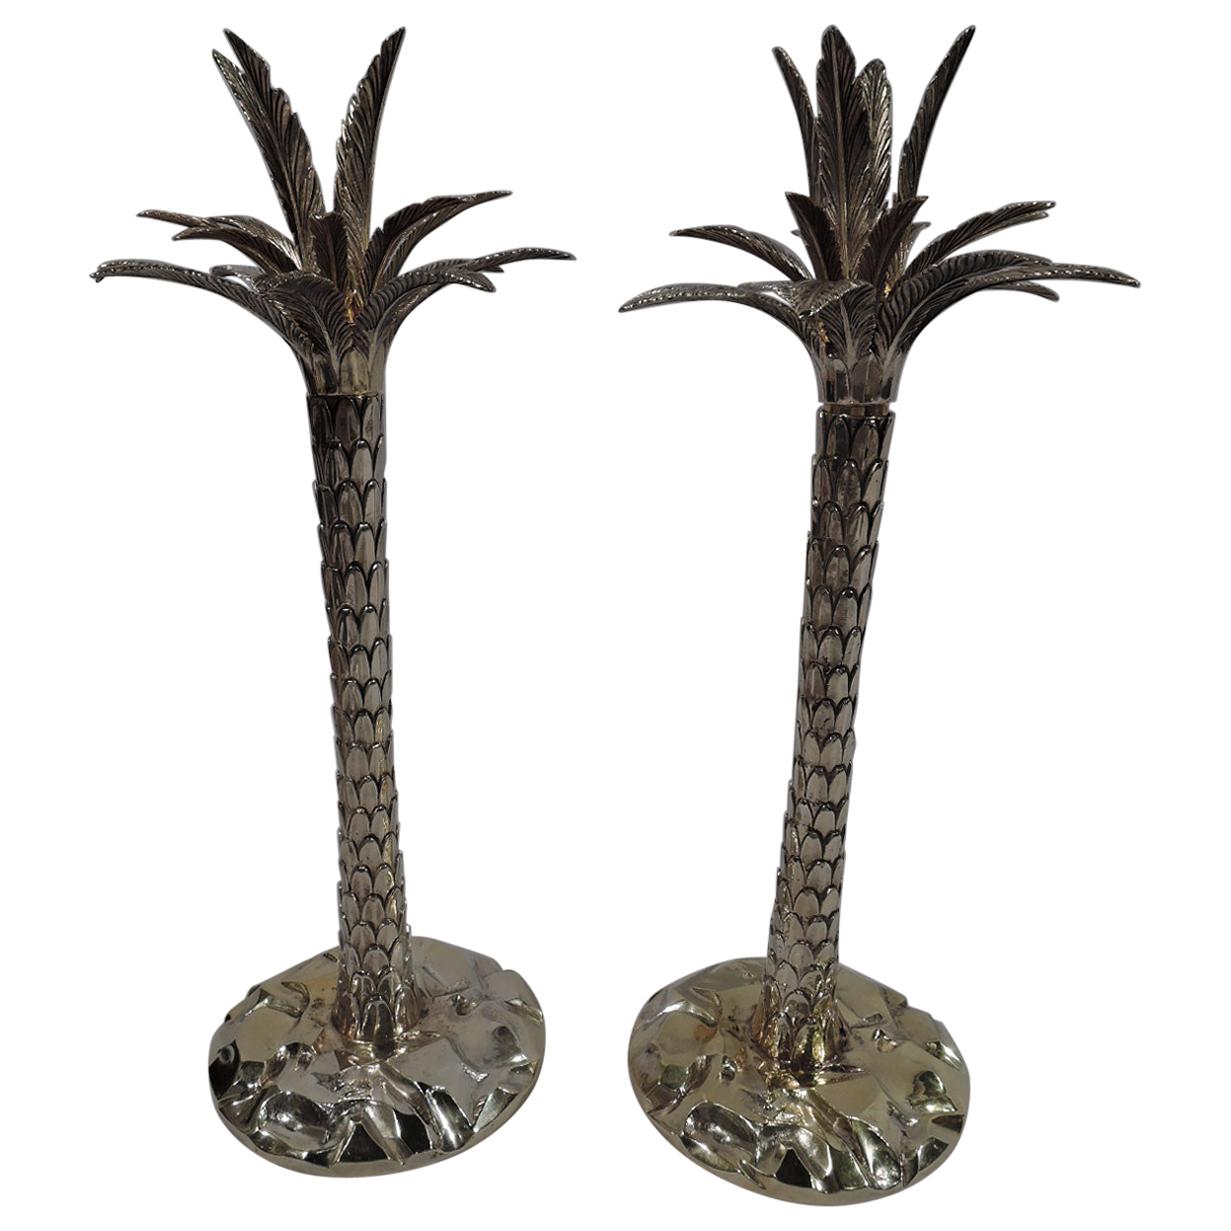 Pair of Fabulous Tiffany Gilt Sterling Silver Palm Tree Candlesticks